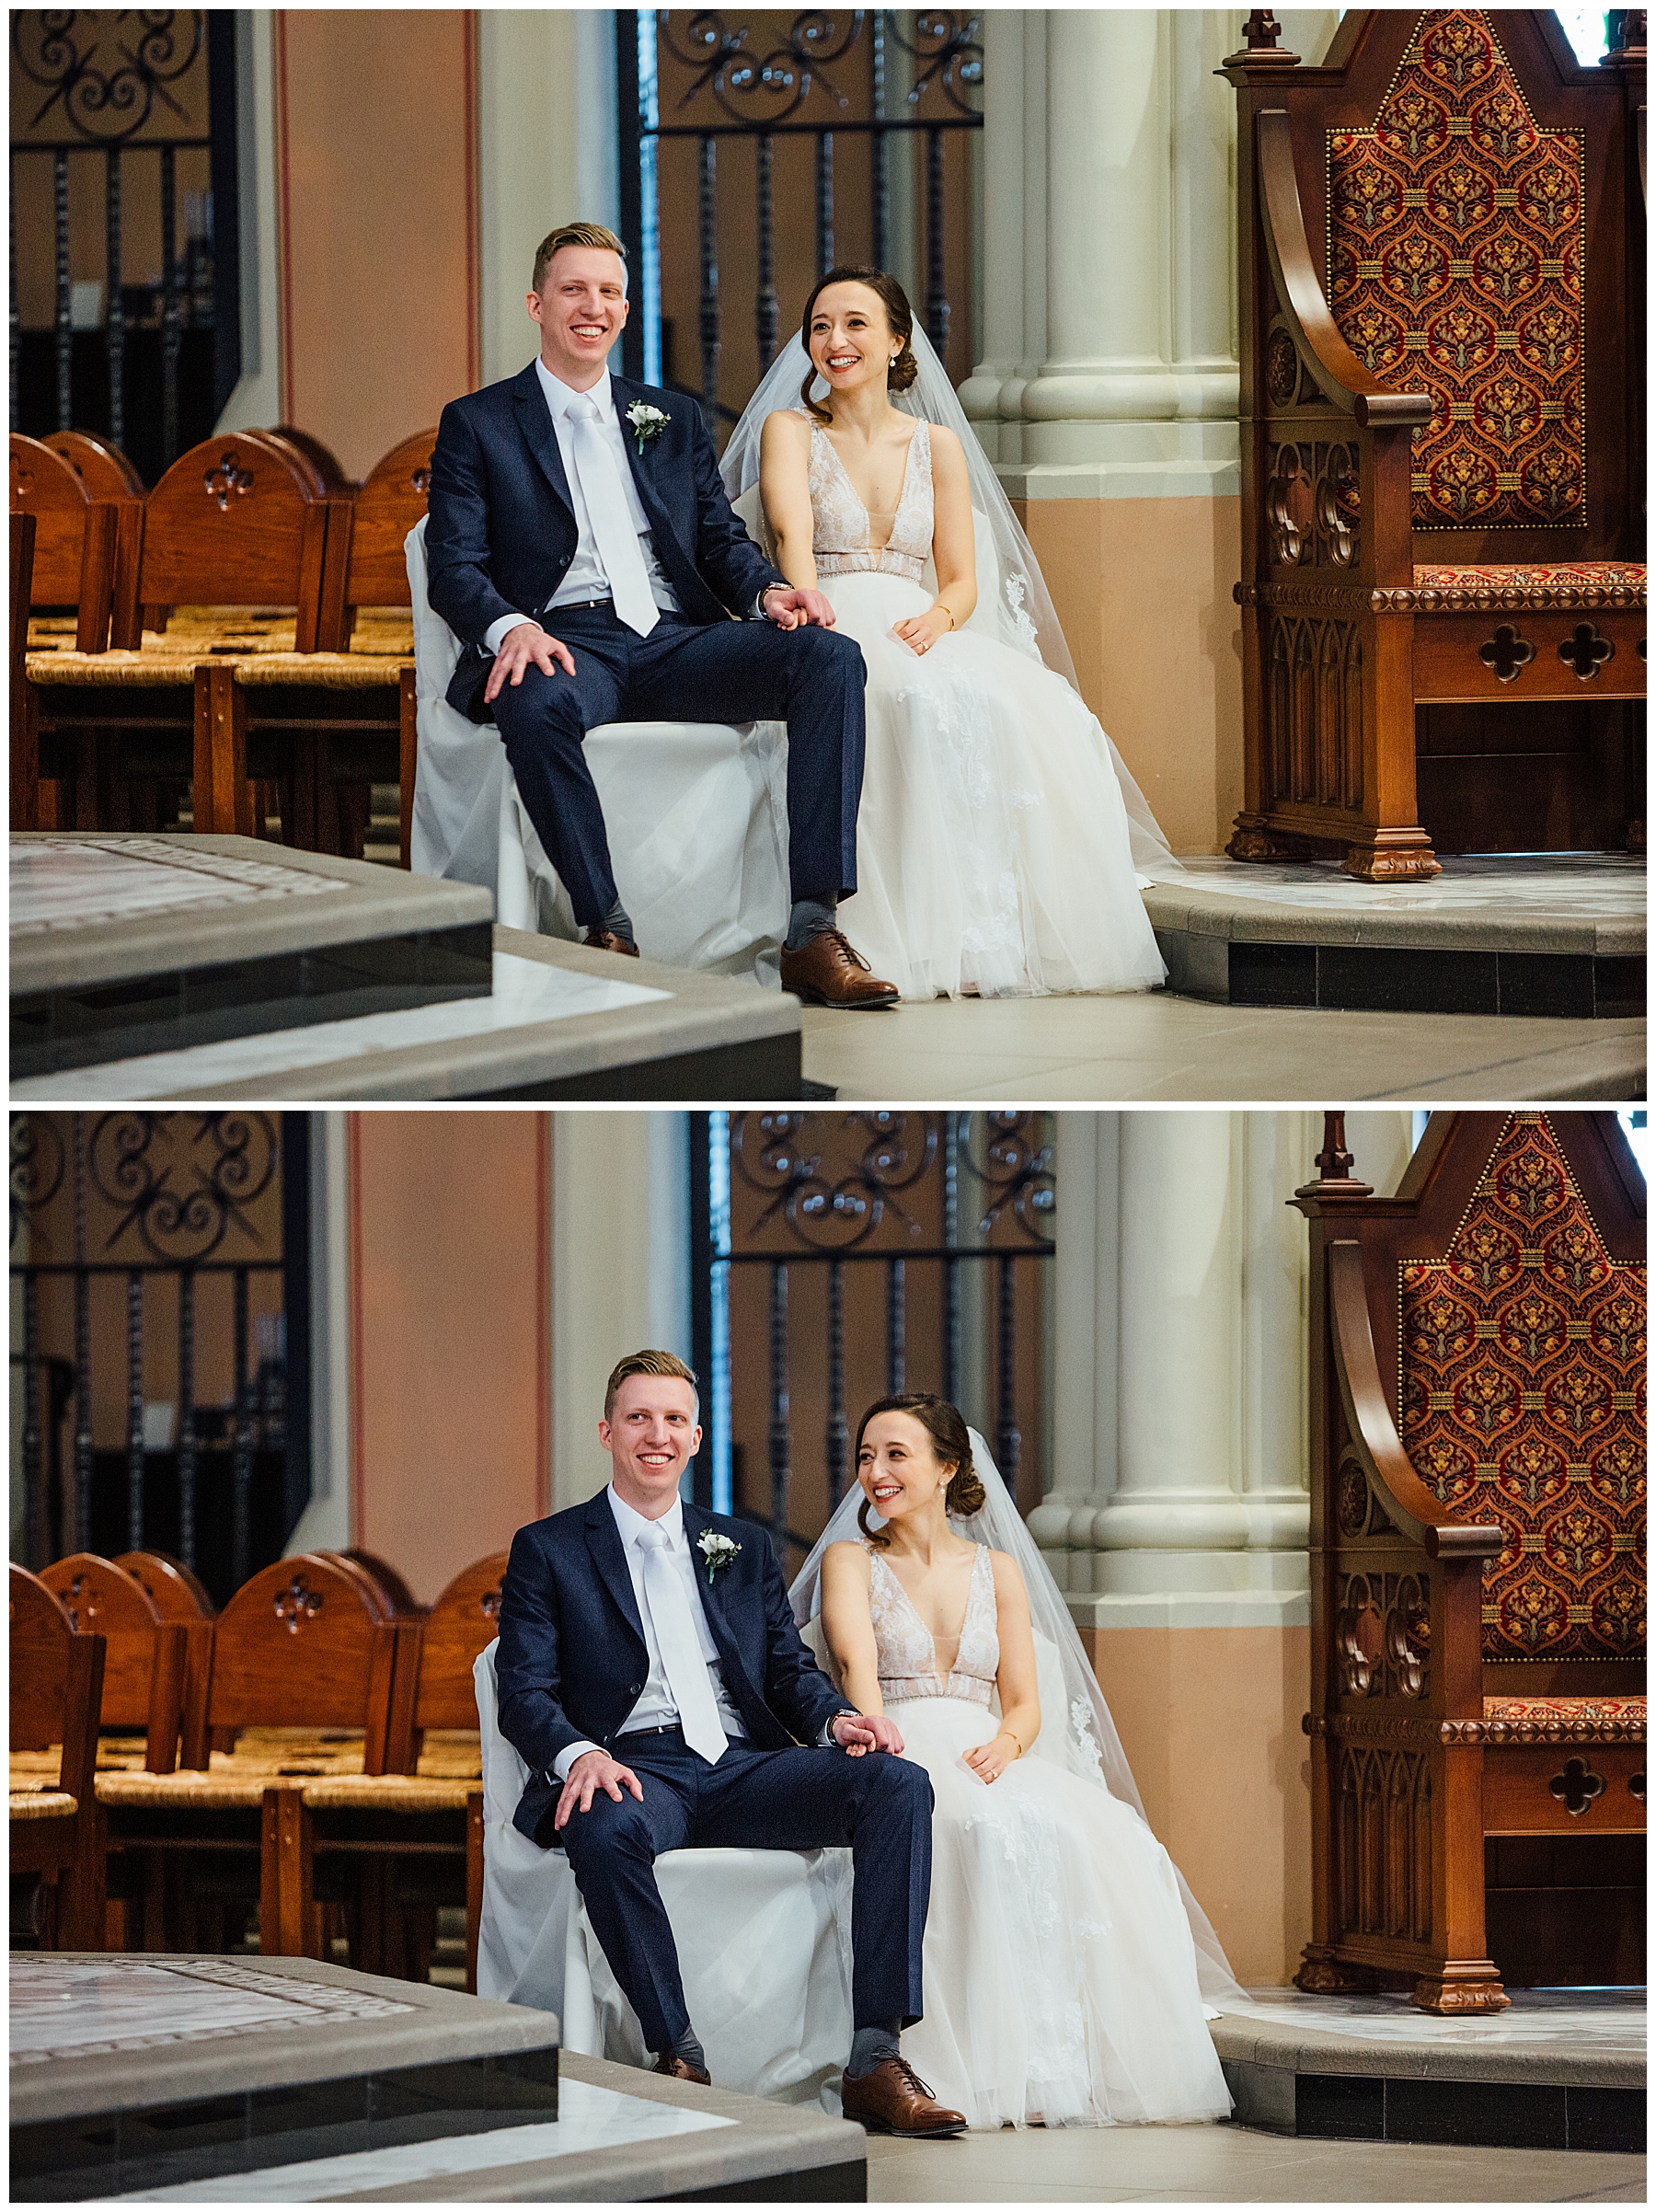 Bride and groom laughing during wedding at St. Catholic Church